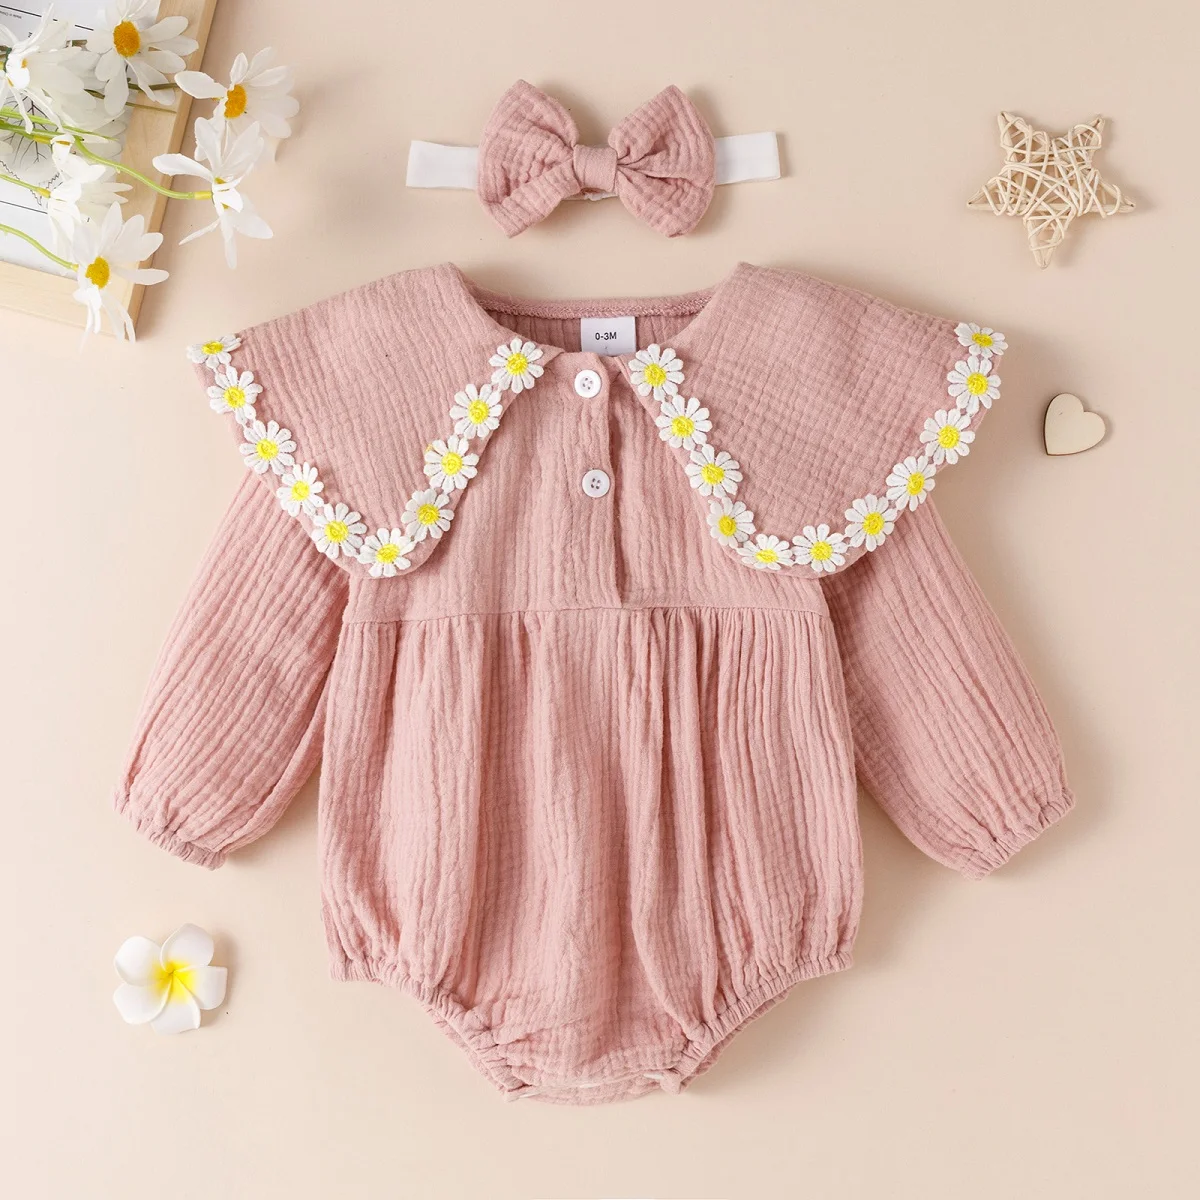 

hibobi Baby Girls Romper Autumn Long Sleeve Solid Color Cotton Jumpsuit With Bowknot Headband Cute Daisy Decor Infant Outfit